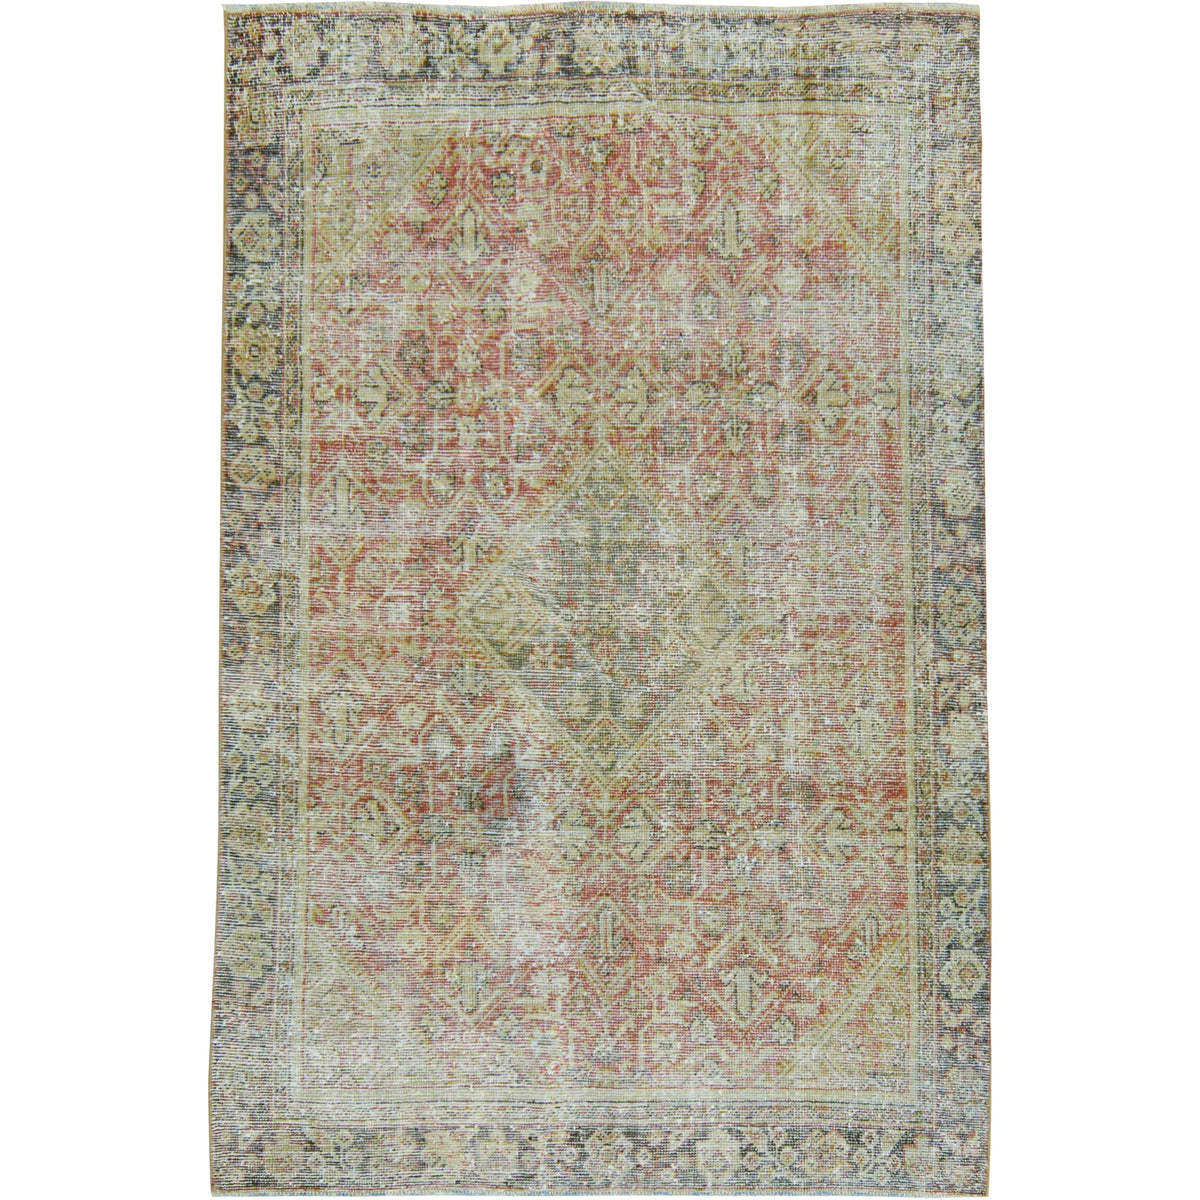 Osa | Radiant Red | Kuden Rugs